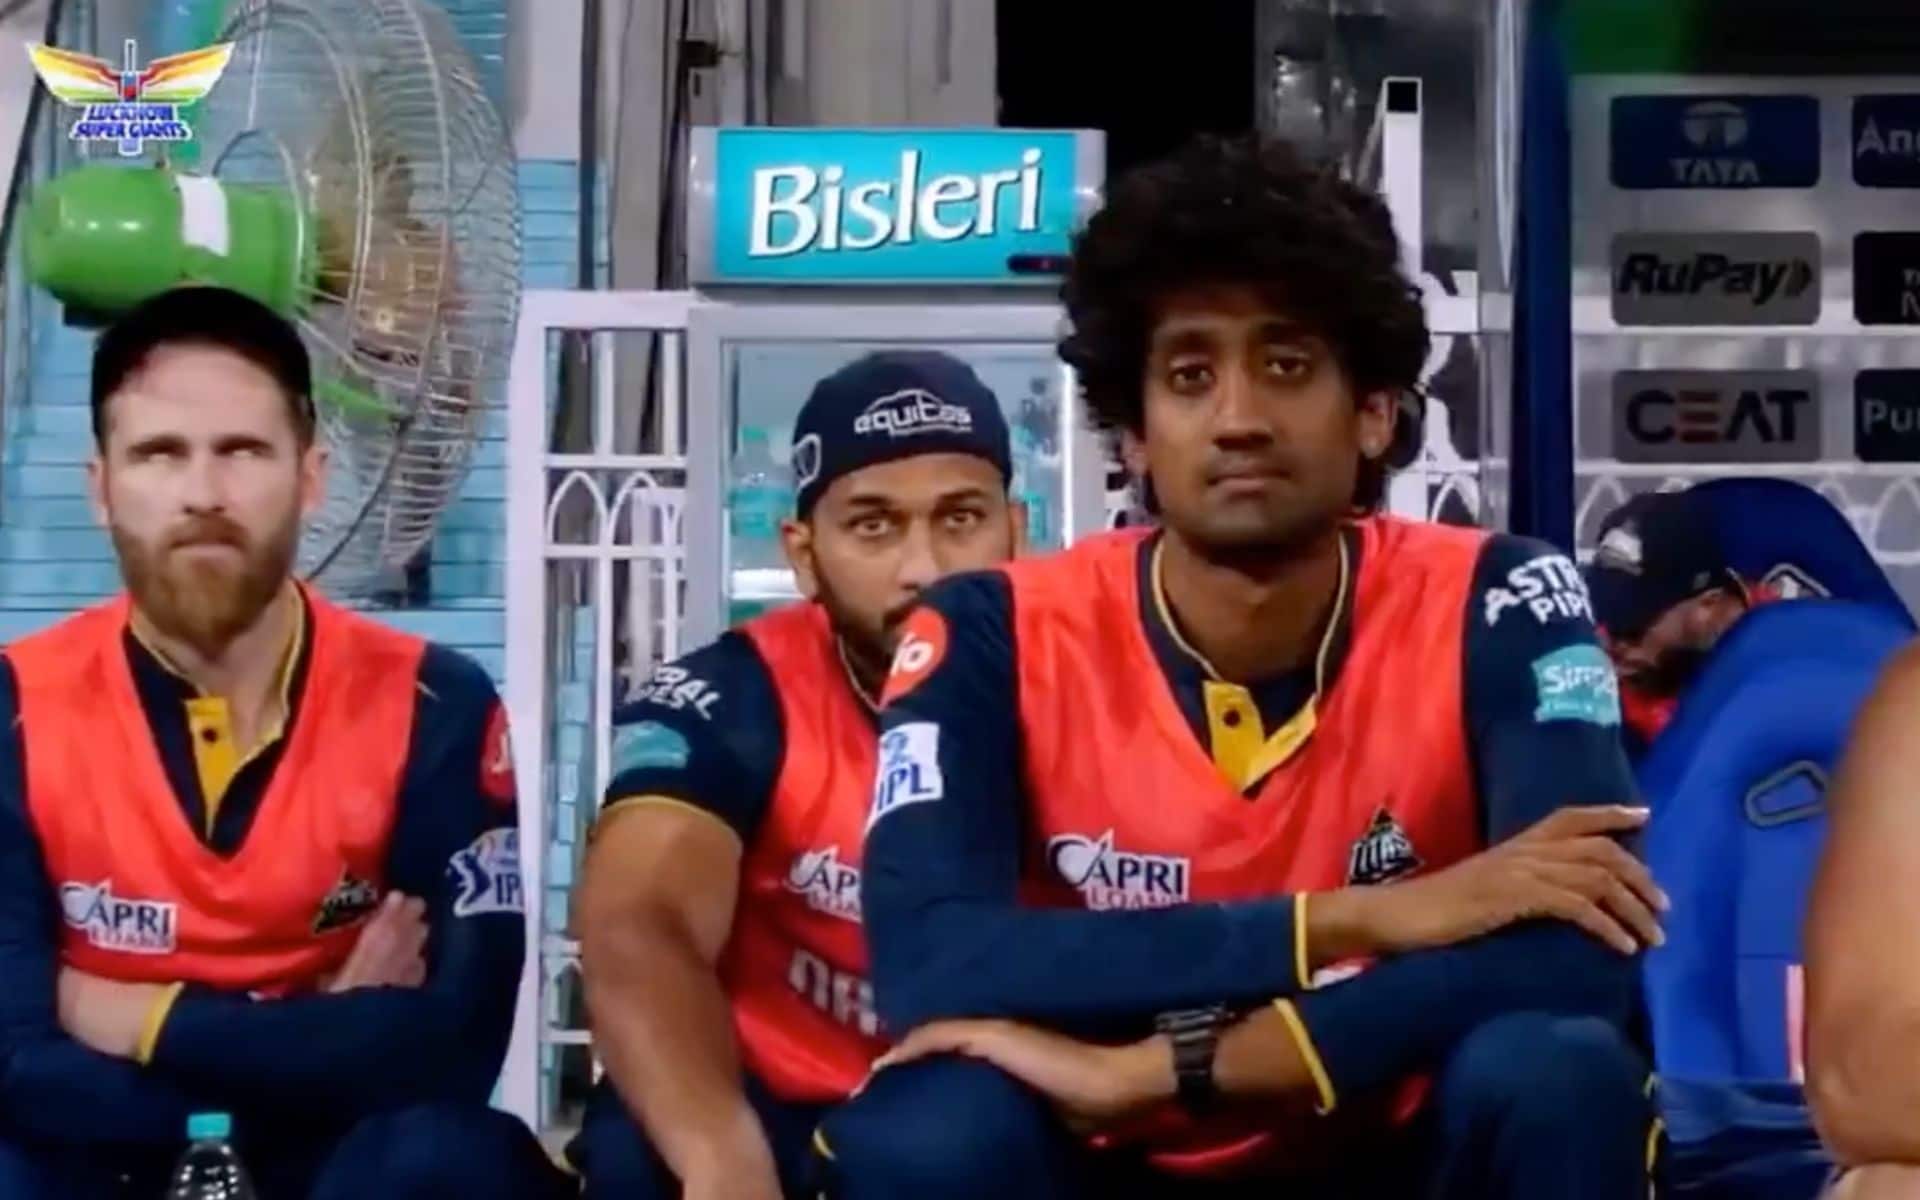 Kane Williamson rolling his eyes from the dugout (X.com)